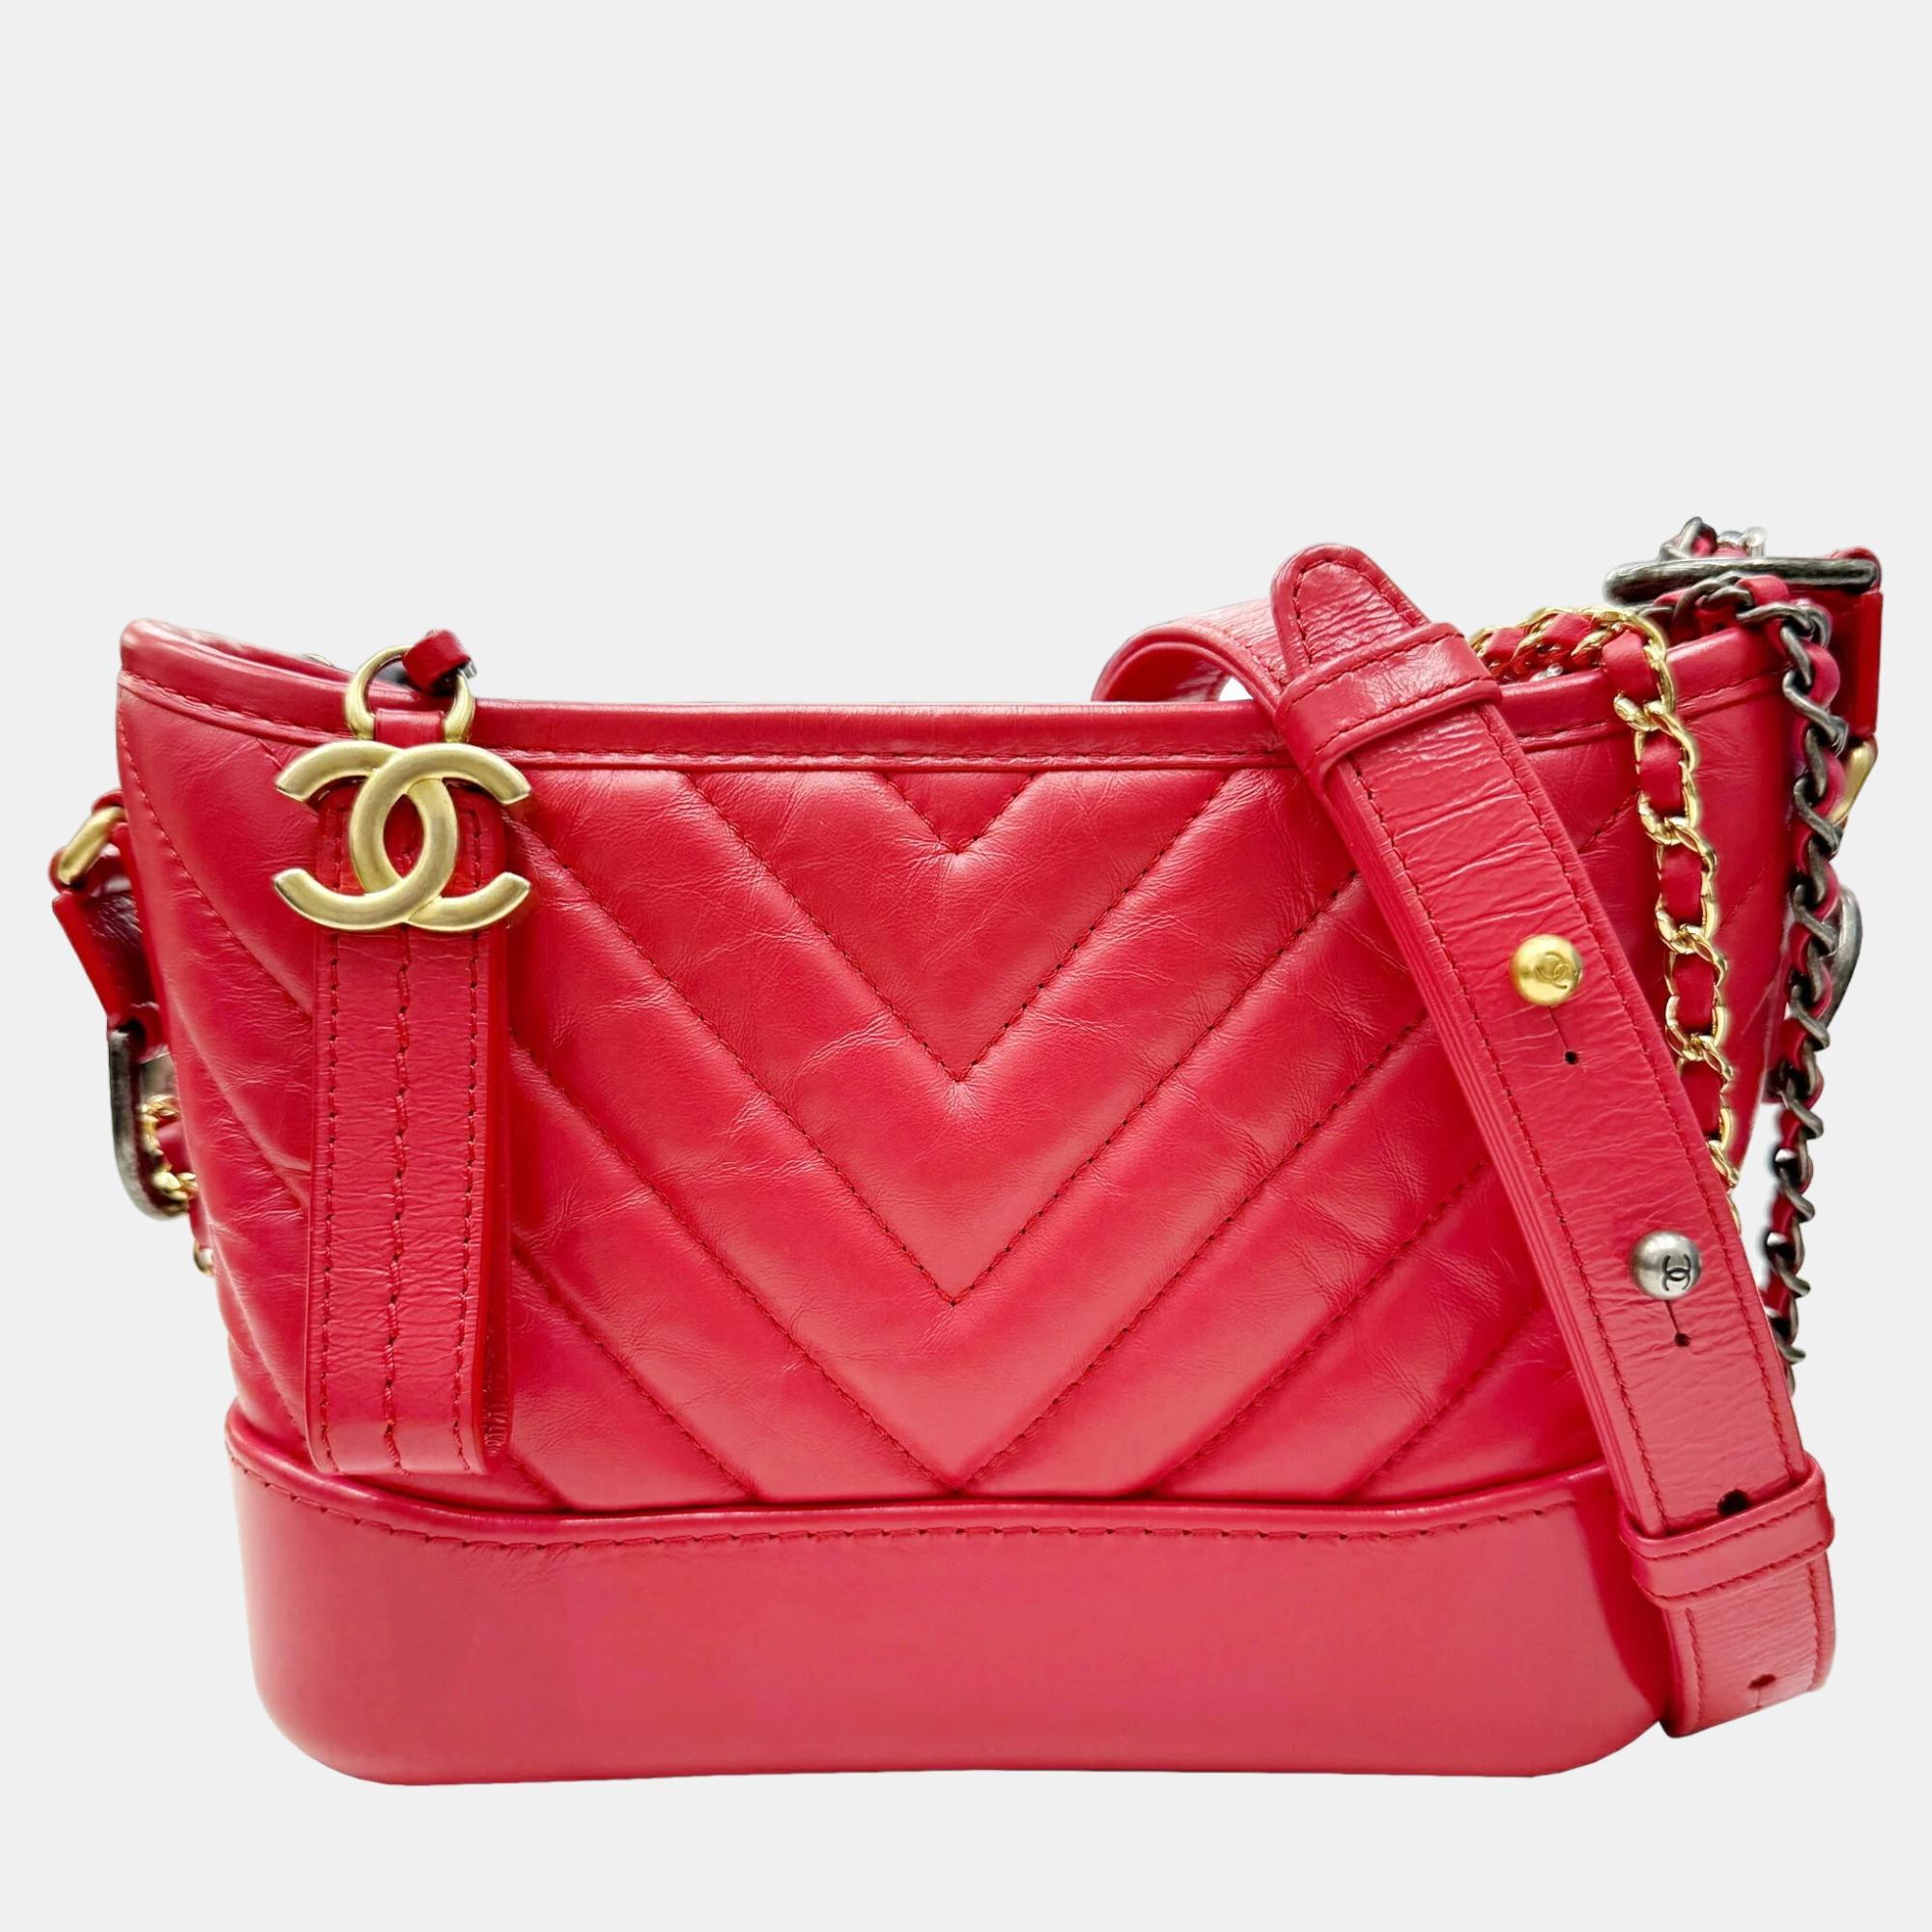 Chanel red leather small gabrielle shoulder bags